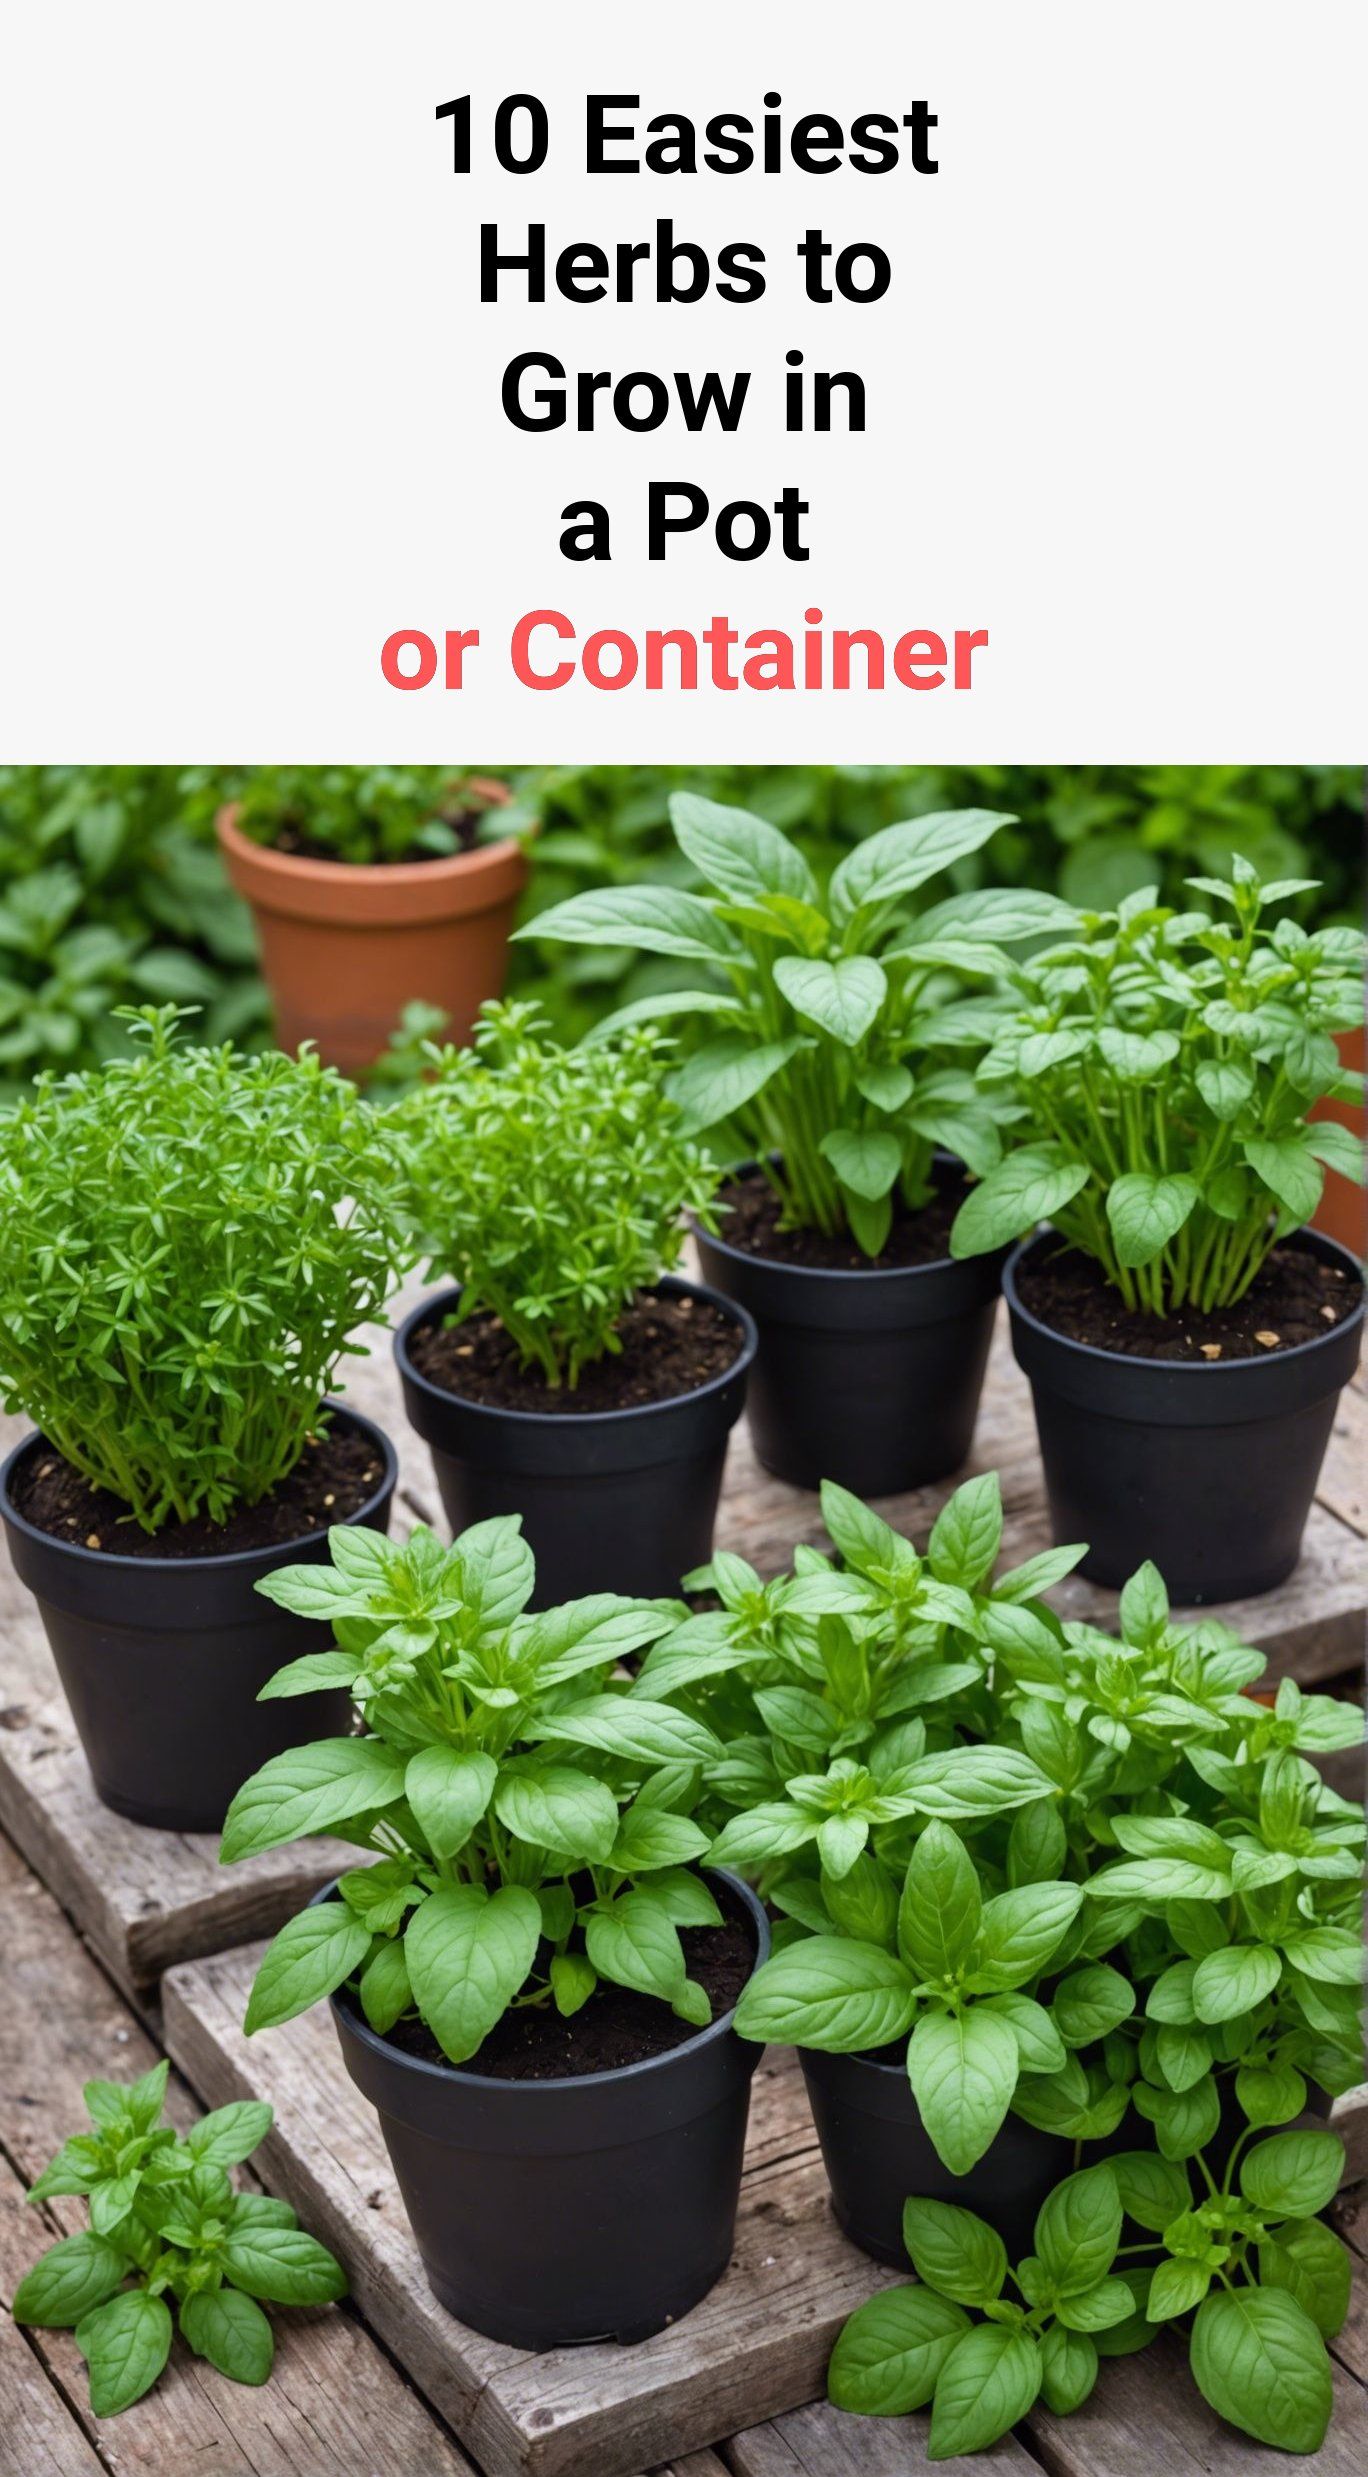 10 Easiest Herbs to Grow in a Pot or Container